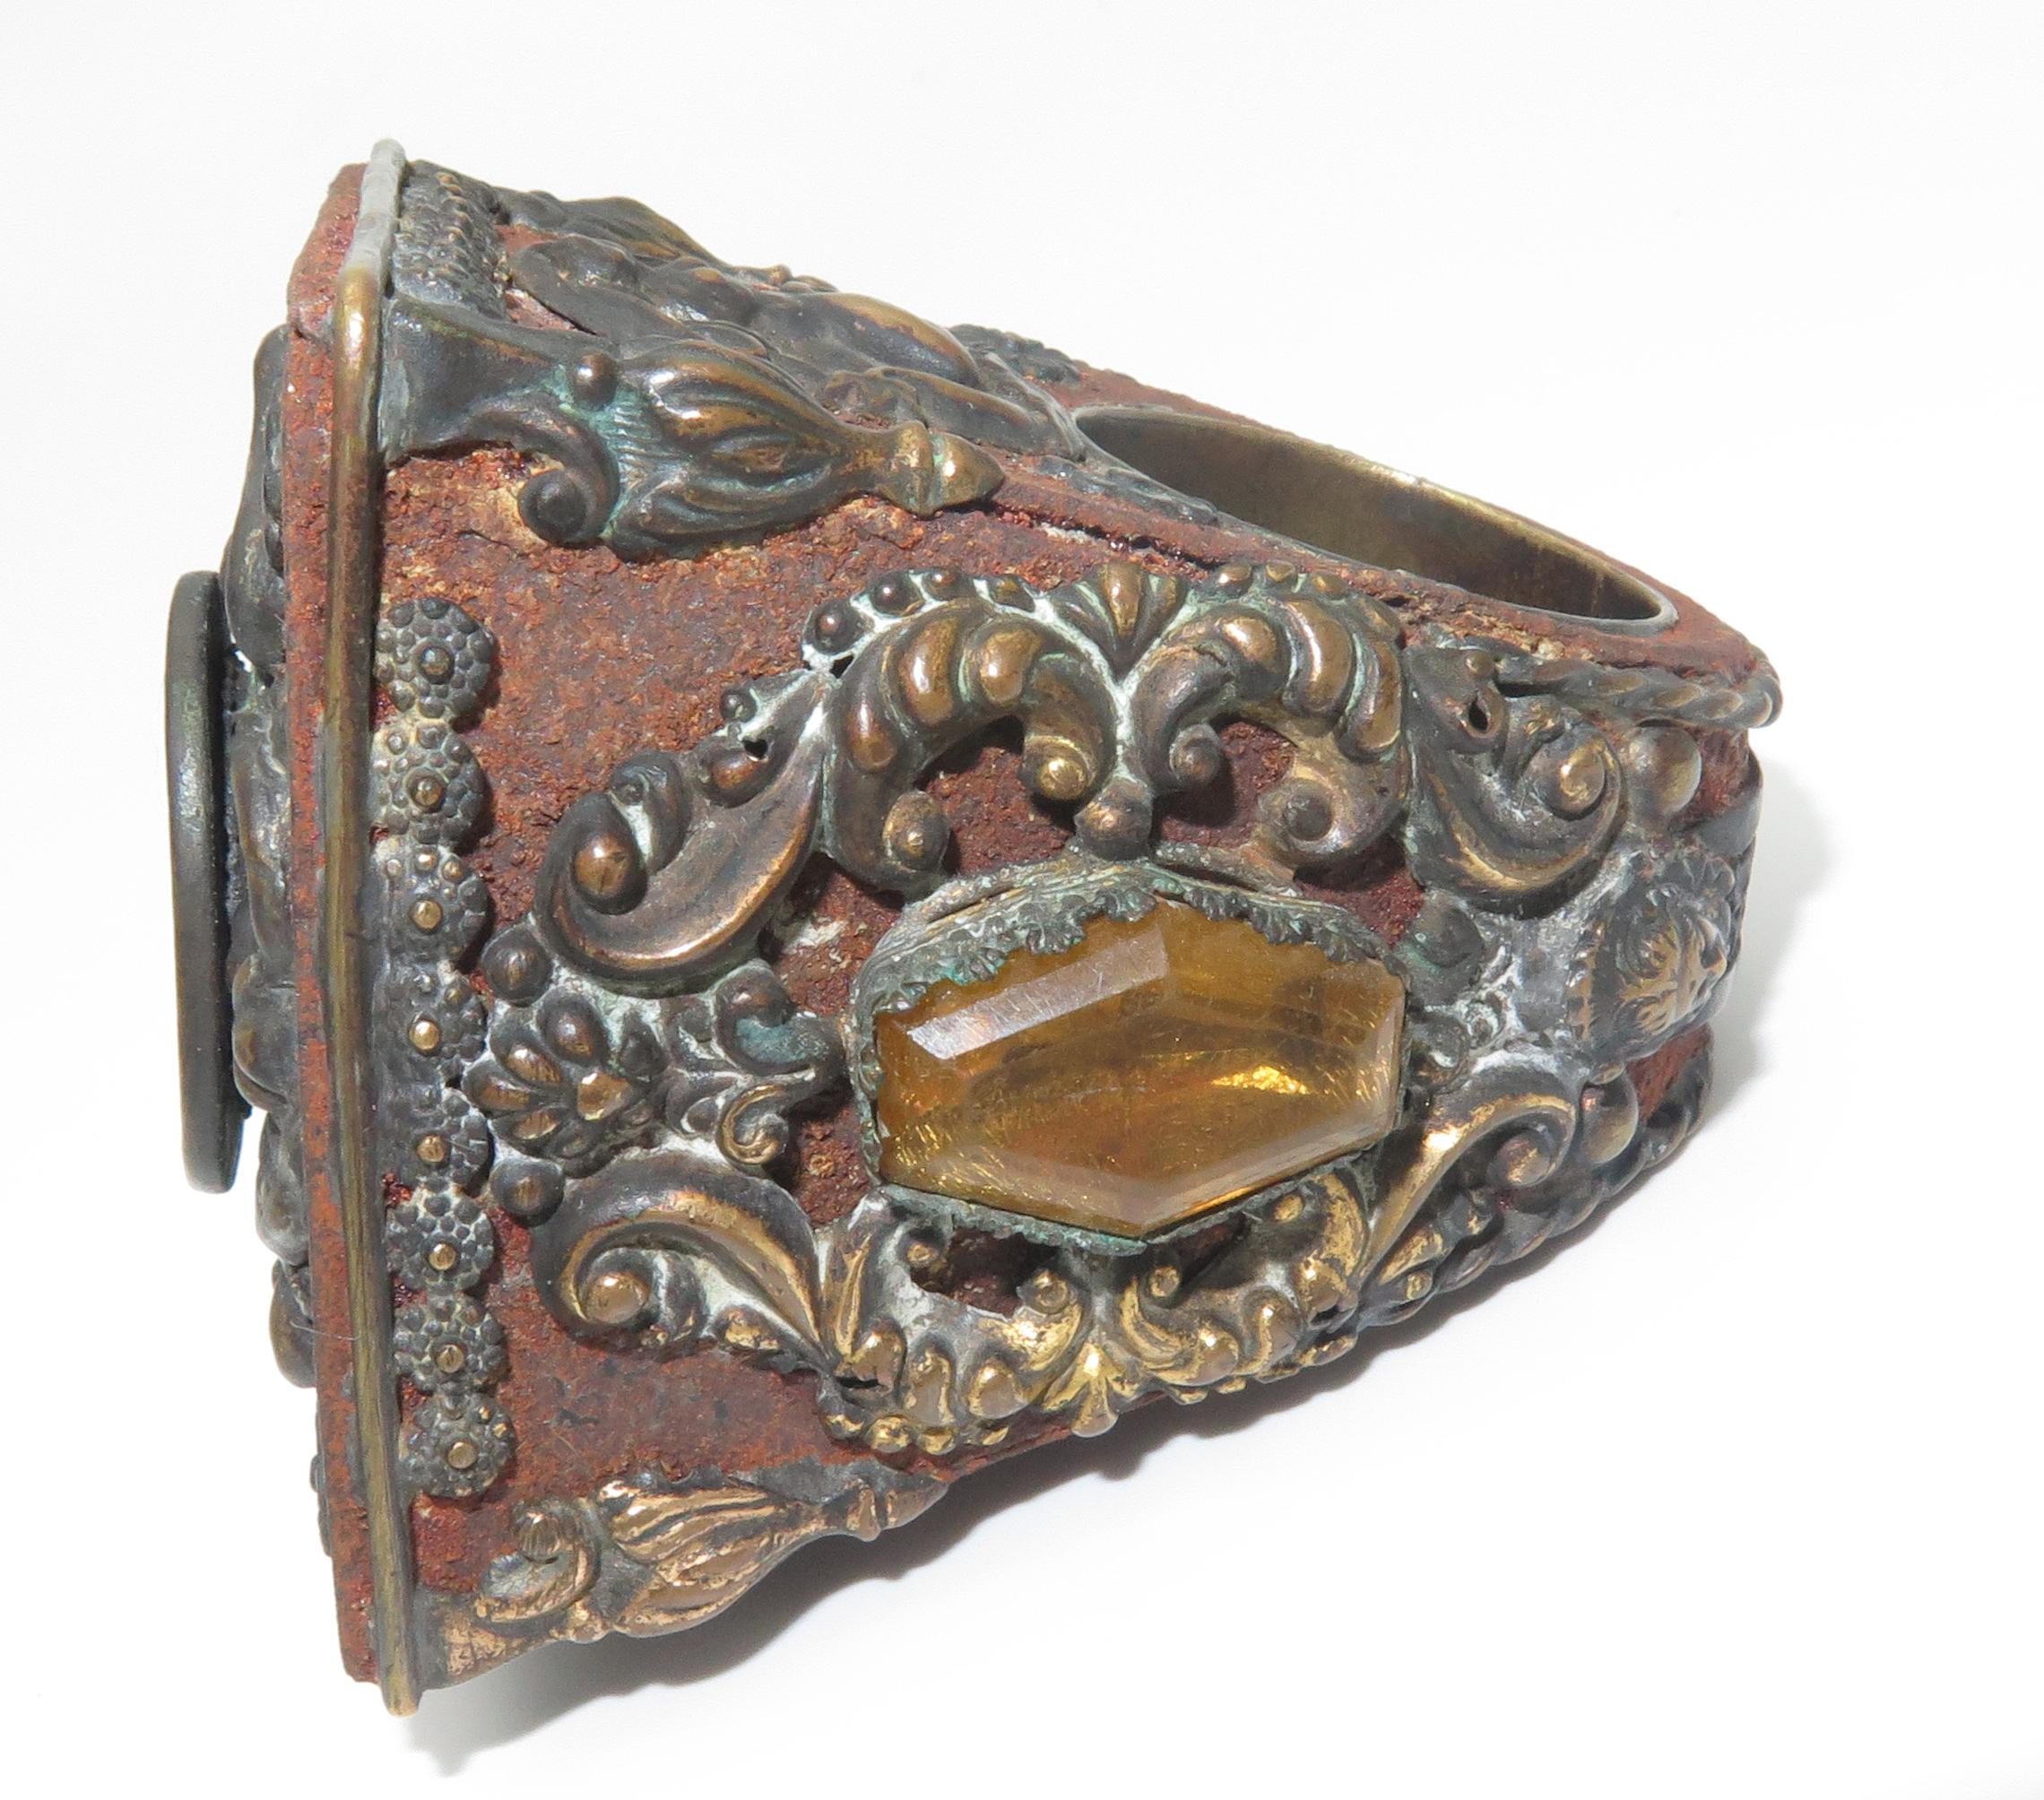 A vintage historic Bishop Ring made of blended metals. Rings of this kind, that have survived over time, are rare finds. All four sides of the ring are decorated with relief designs of a contrasting metal. The weight of the ring is 177.8 grams. The